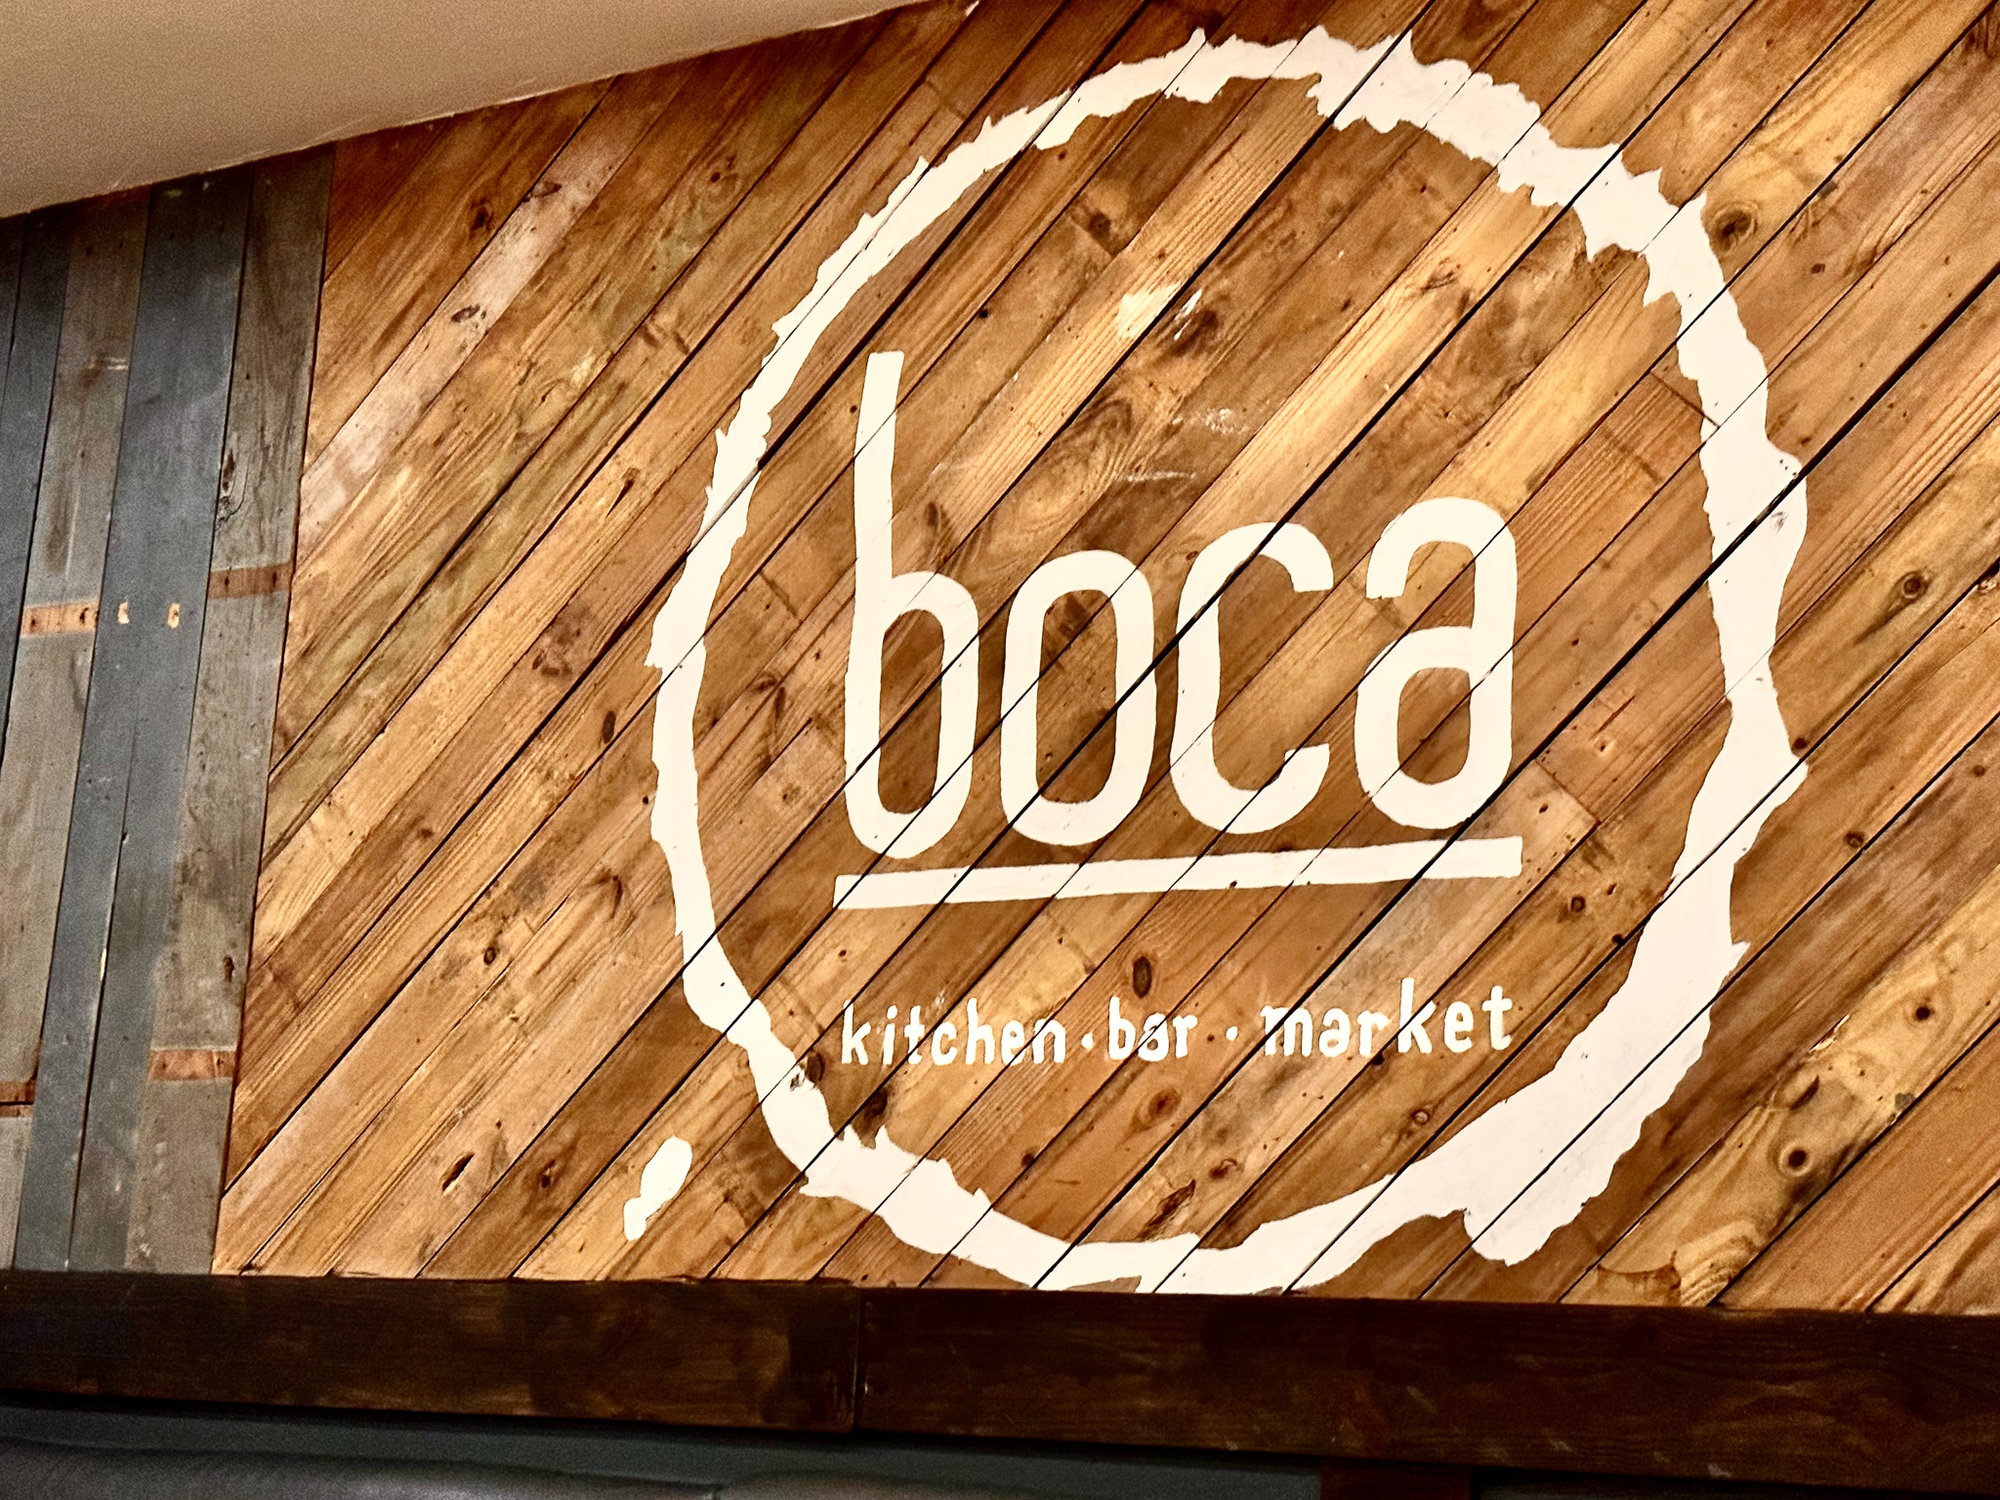 Boca sign painted on wood wall